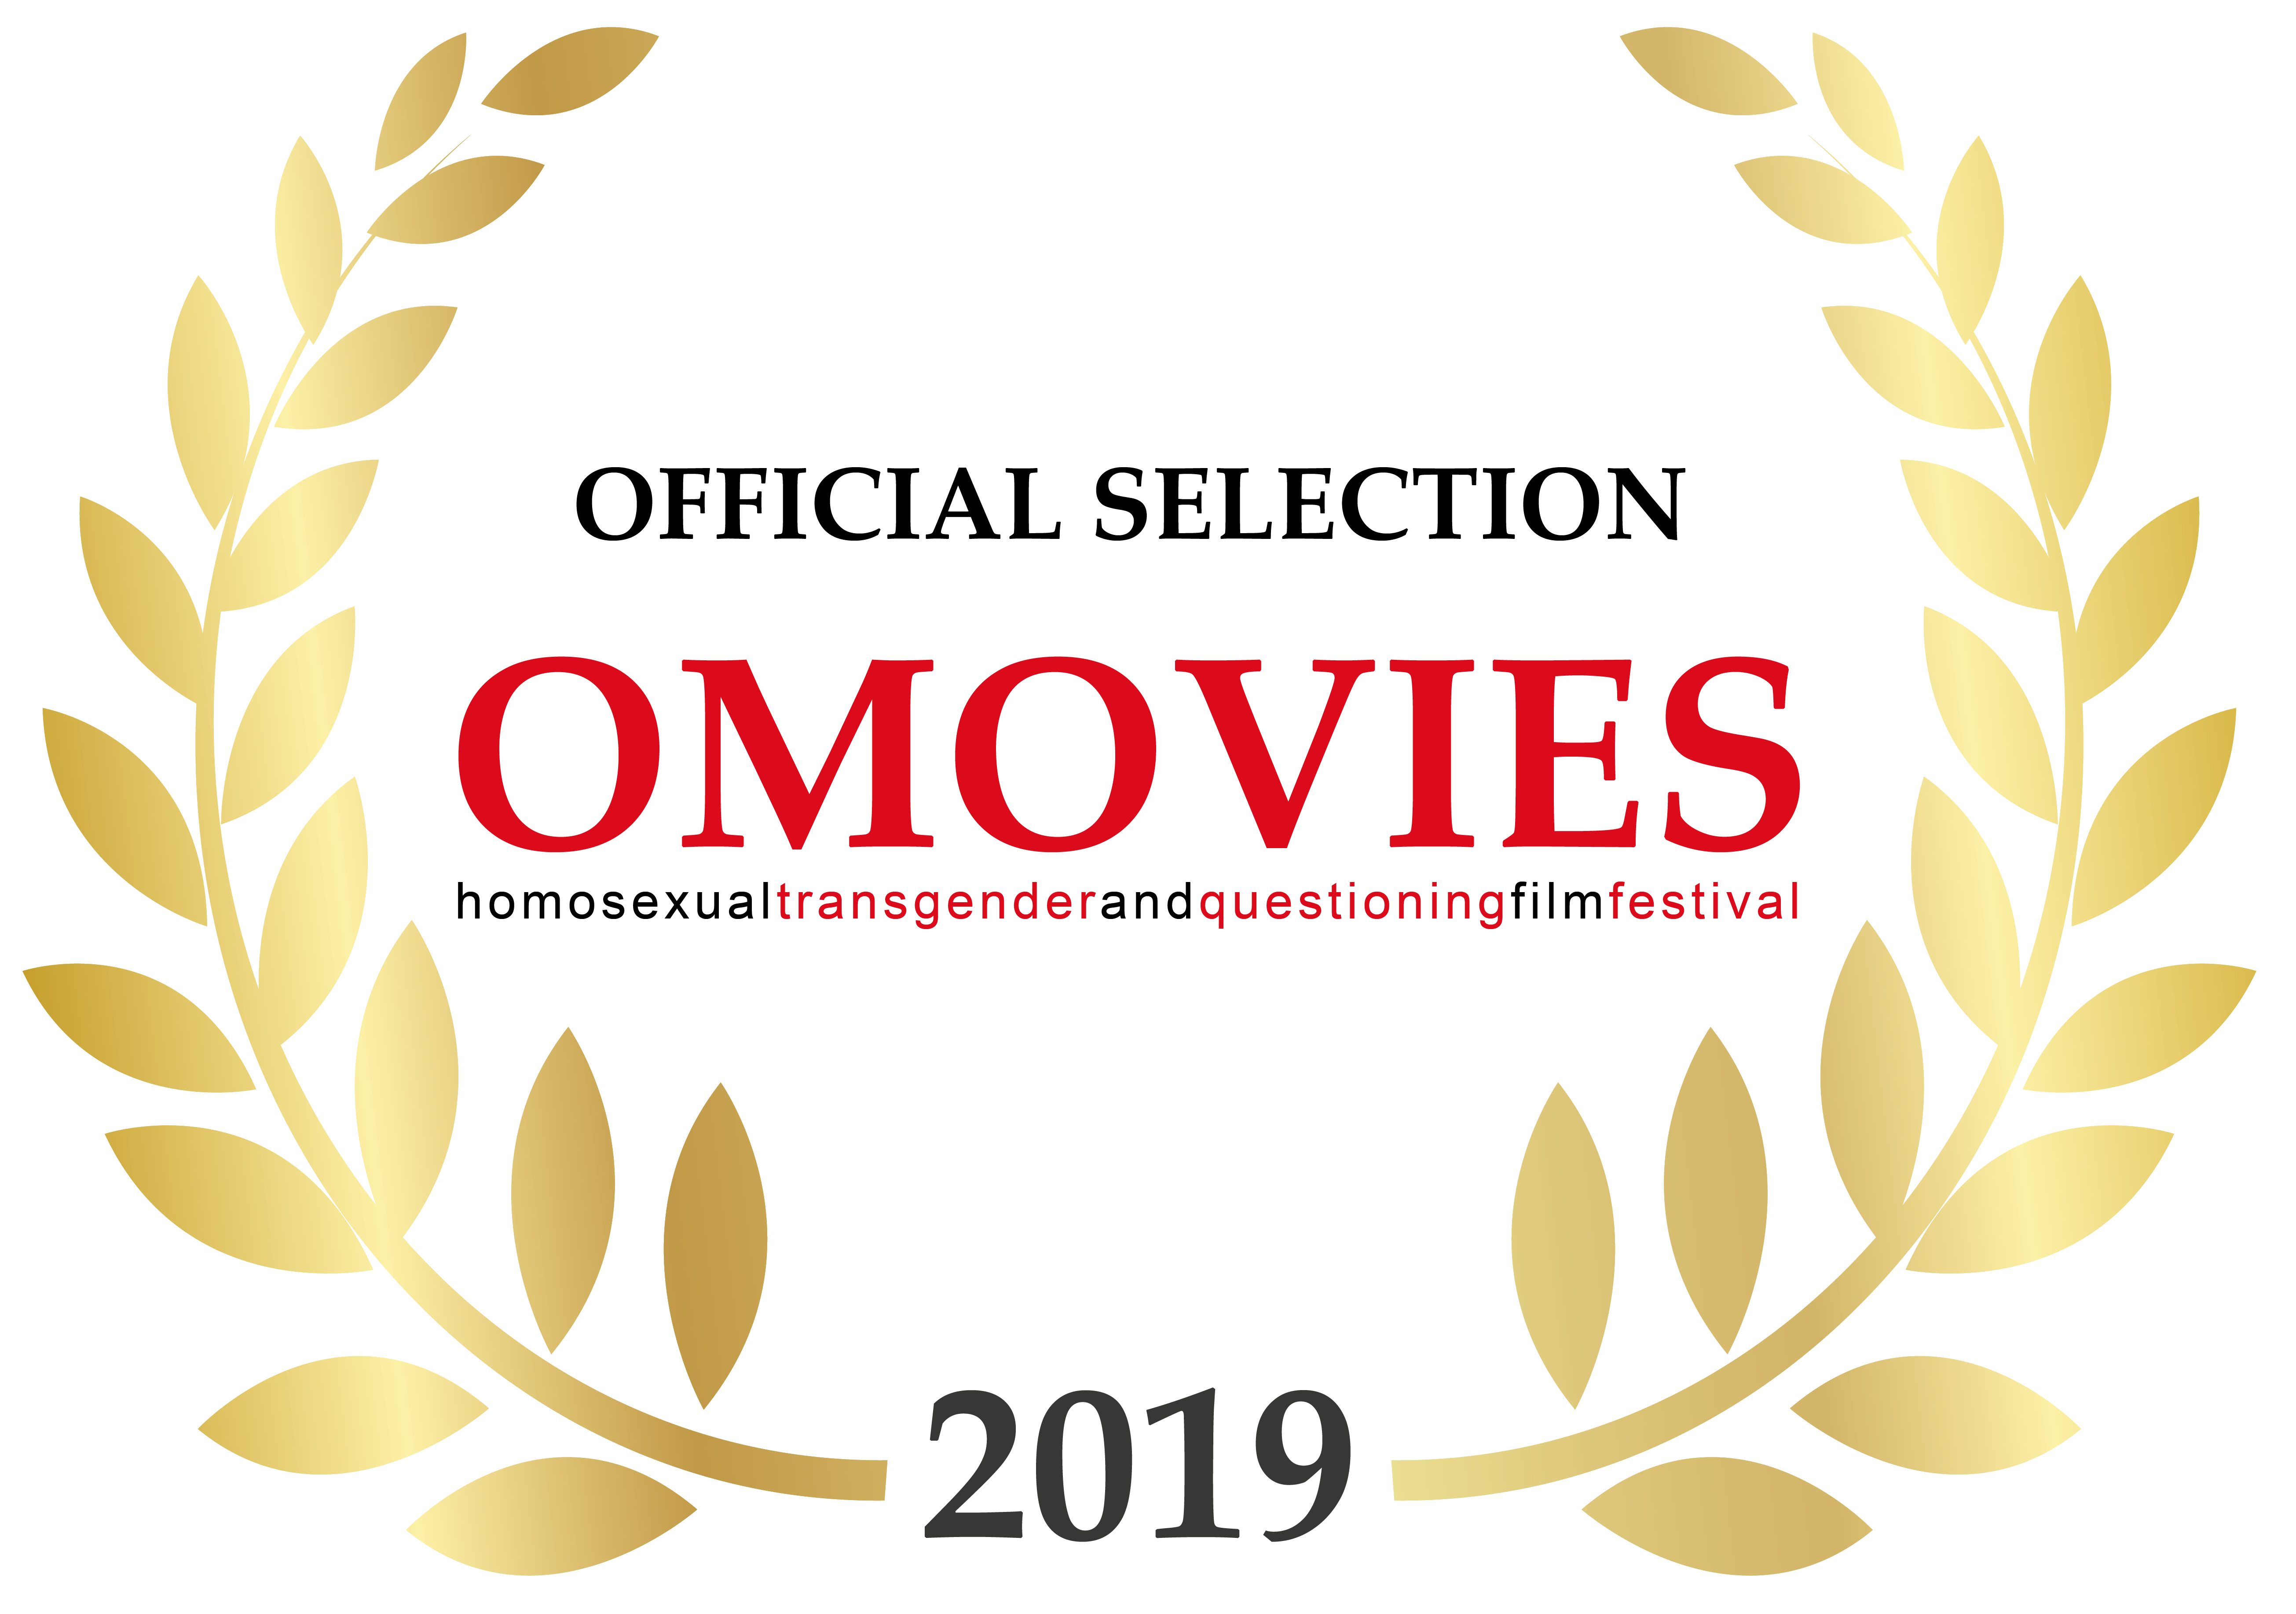 Official Selection #Omovies Omar Flores Sarabia